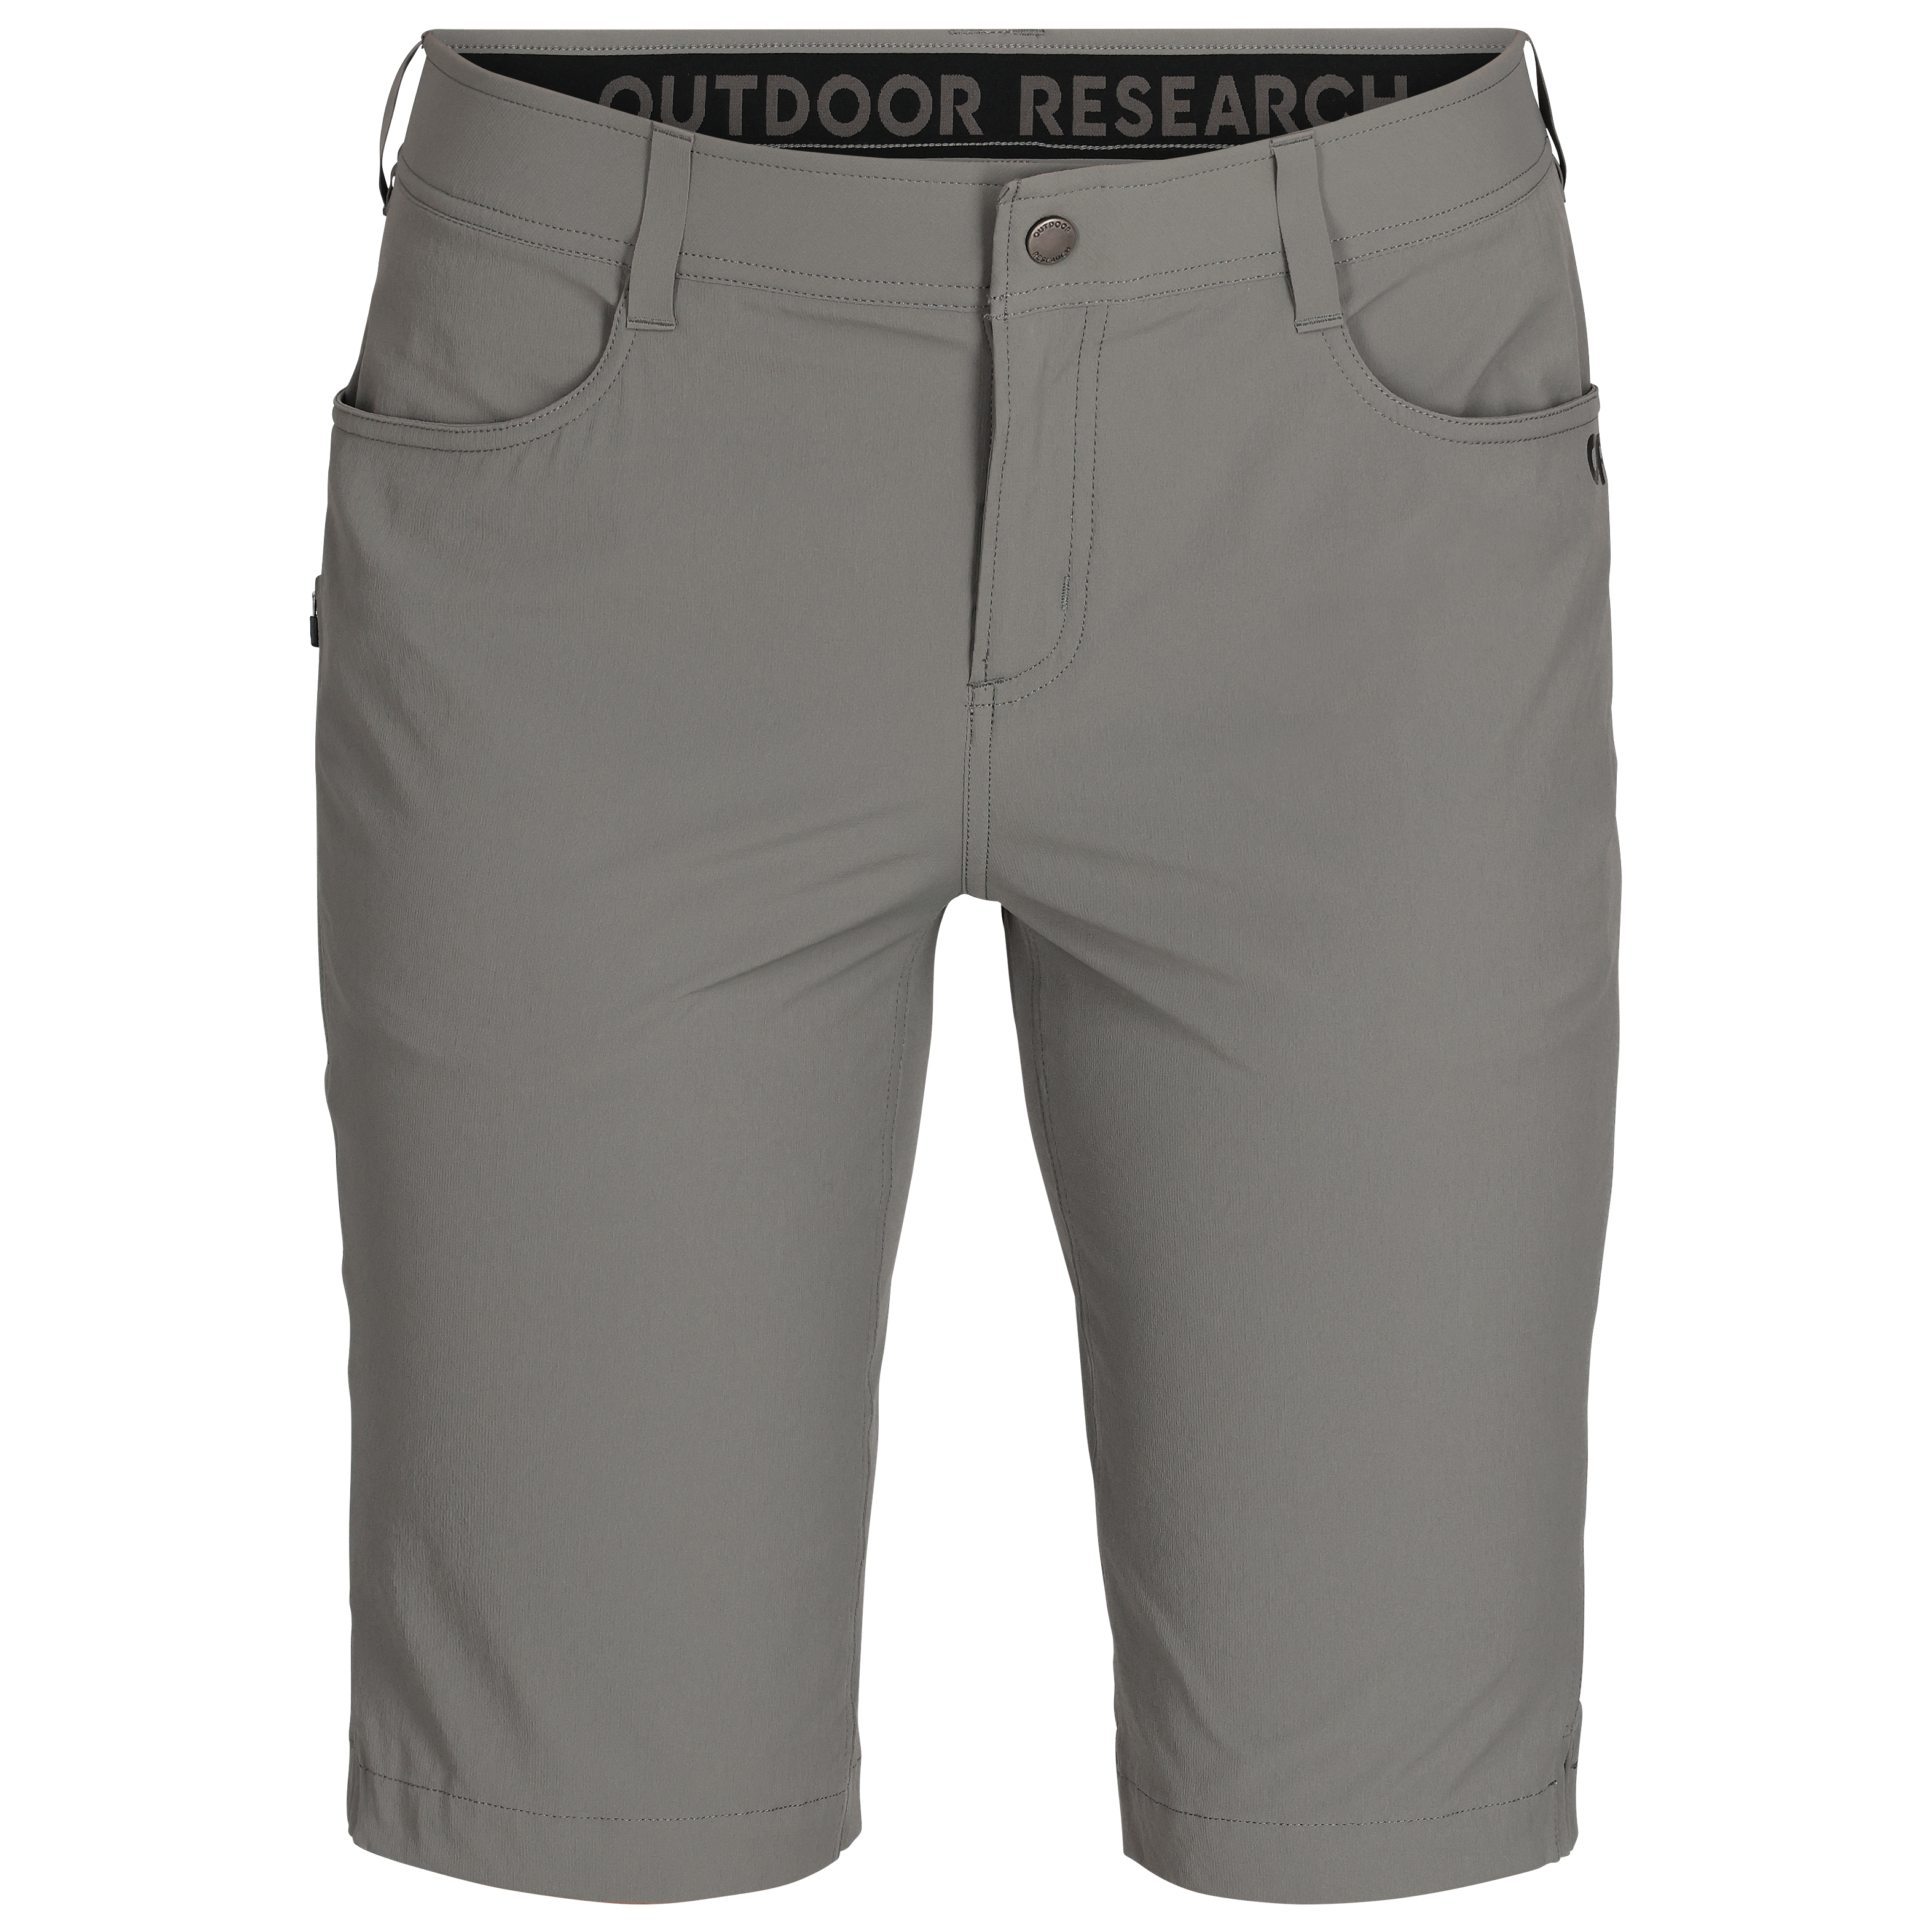 OUTDOOR RESEARCH Outdoor Research Women's Ferrosi UPF 50+ Lightweight  Durable Shorts 5